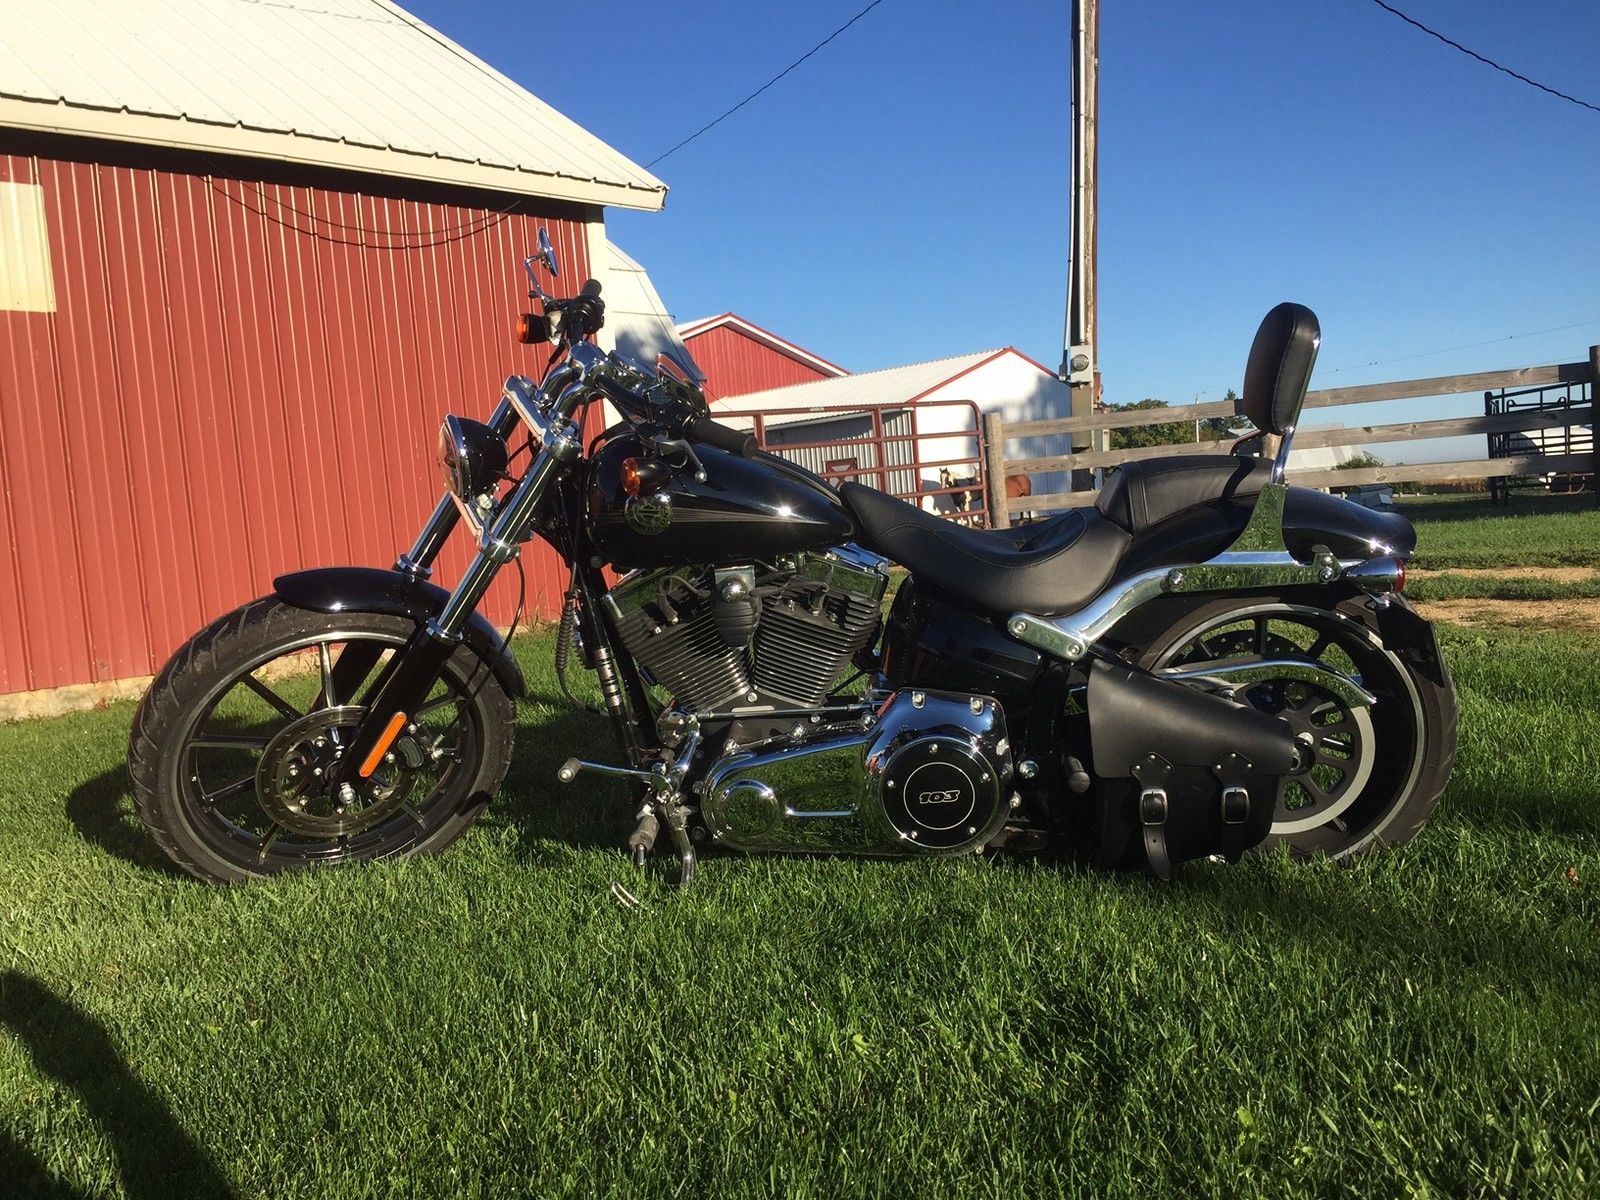 2013 Harley Davidson Breakout With Stage 4 Kit